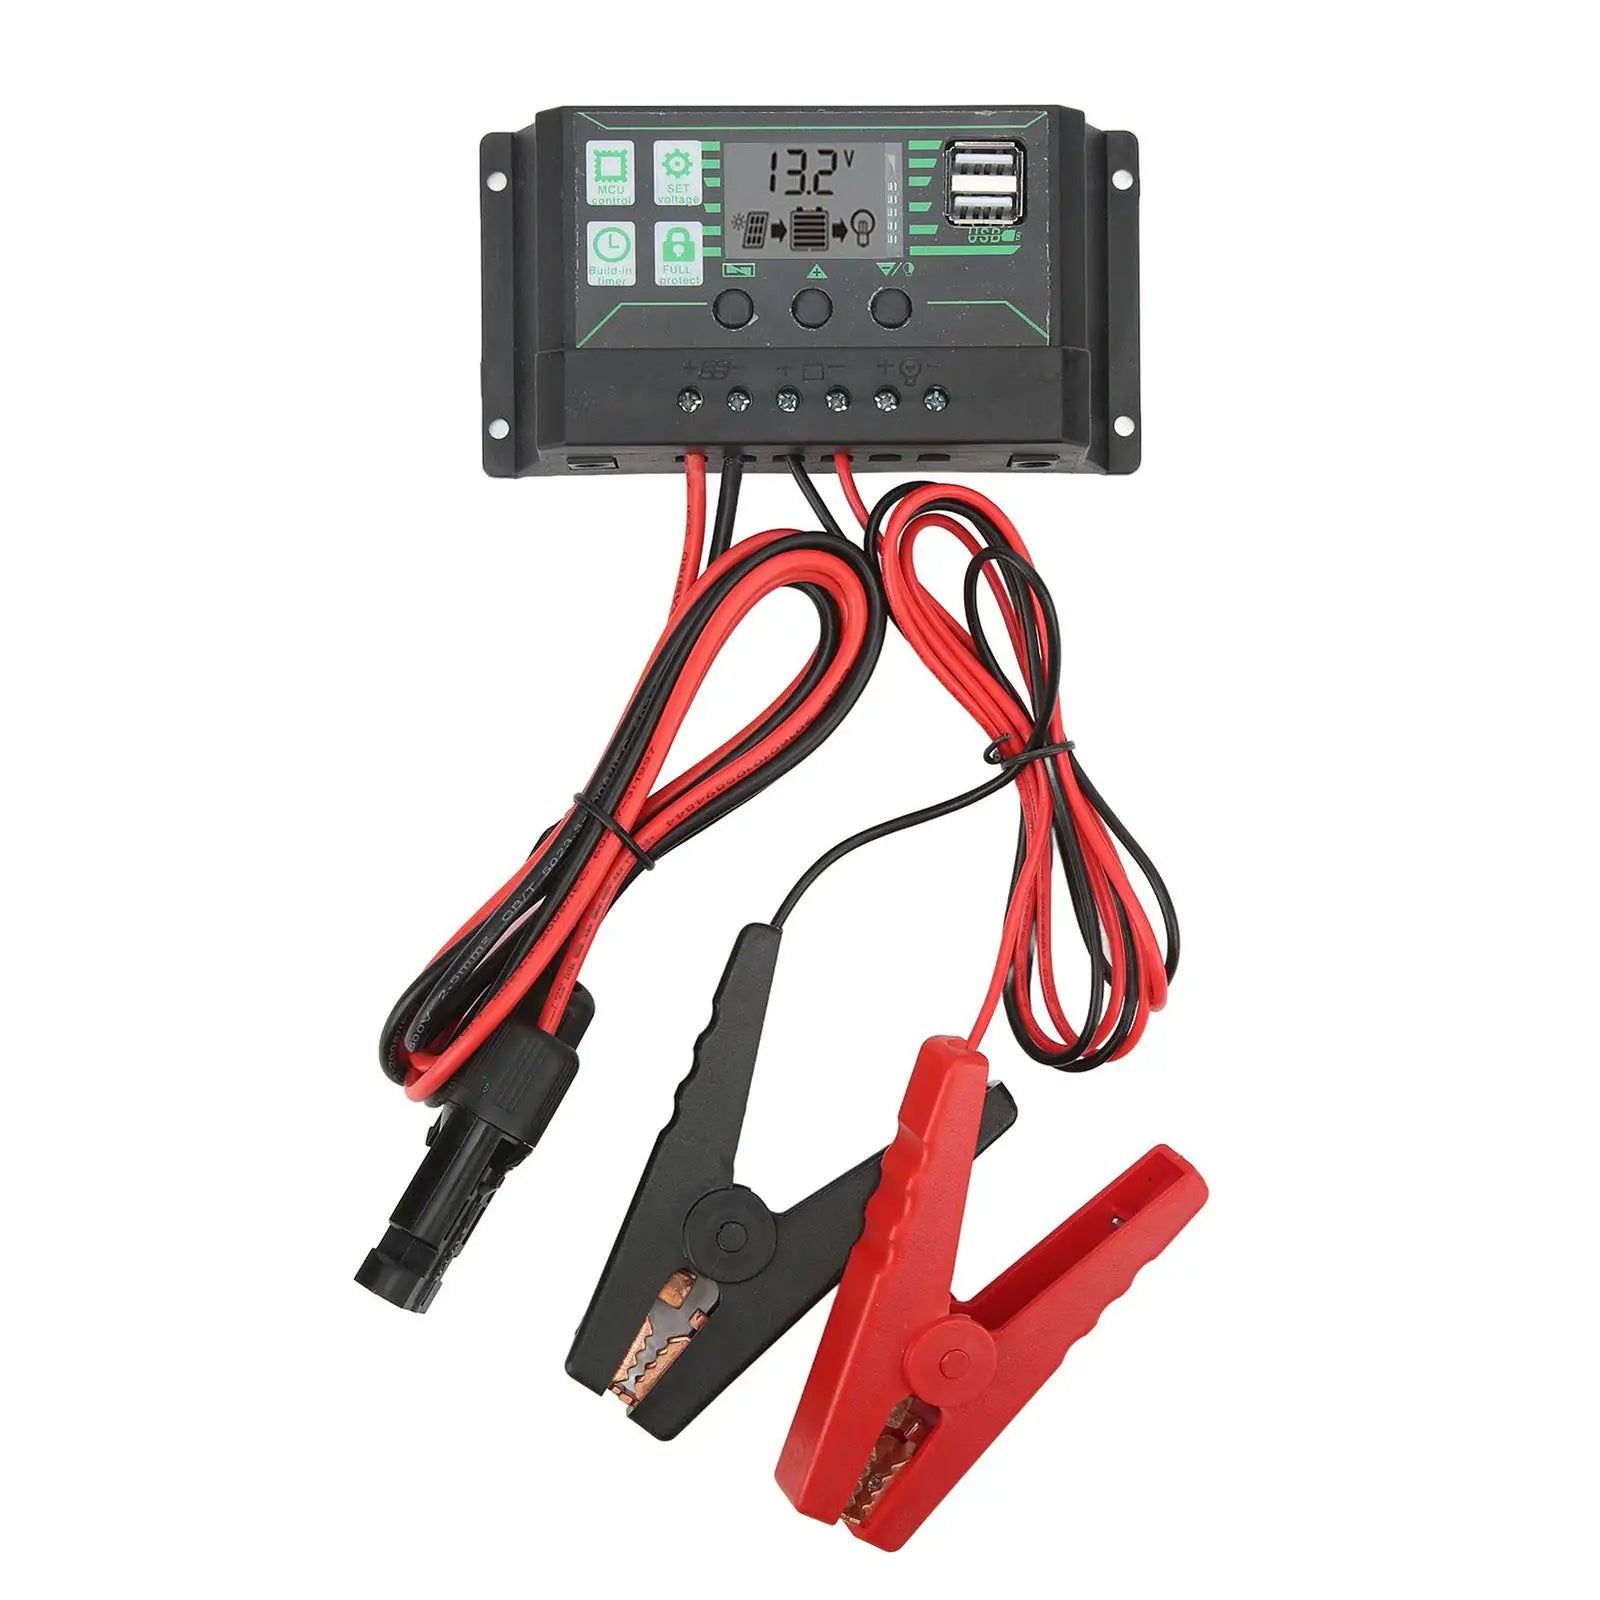 MPPT 10/20/30/60/100A Solar Charge Controller, Solar charge controller with wide LCD screen and adjustable parameters for optimal solar panel charging.